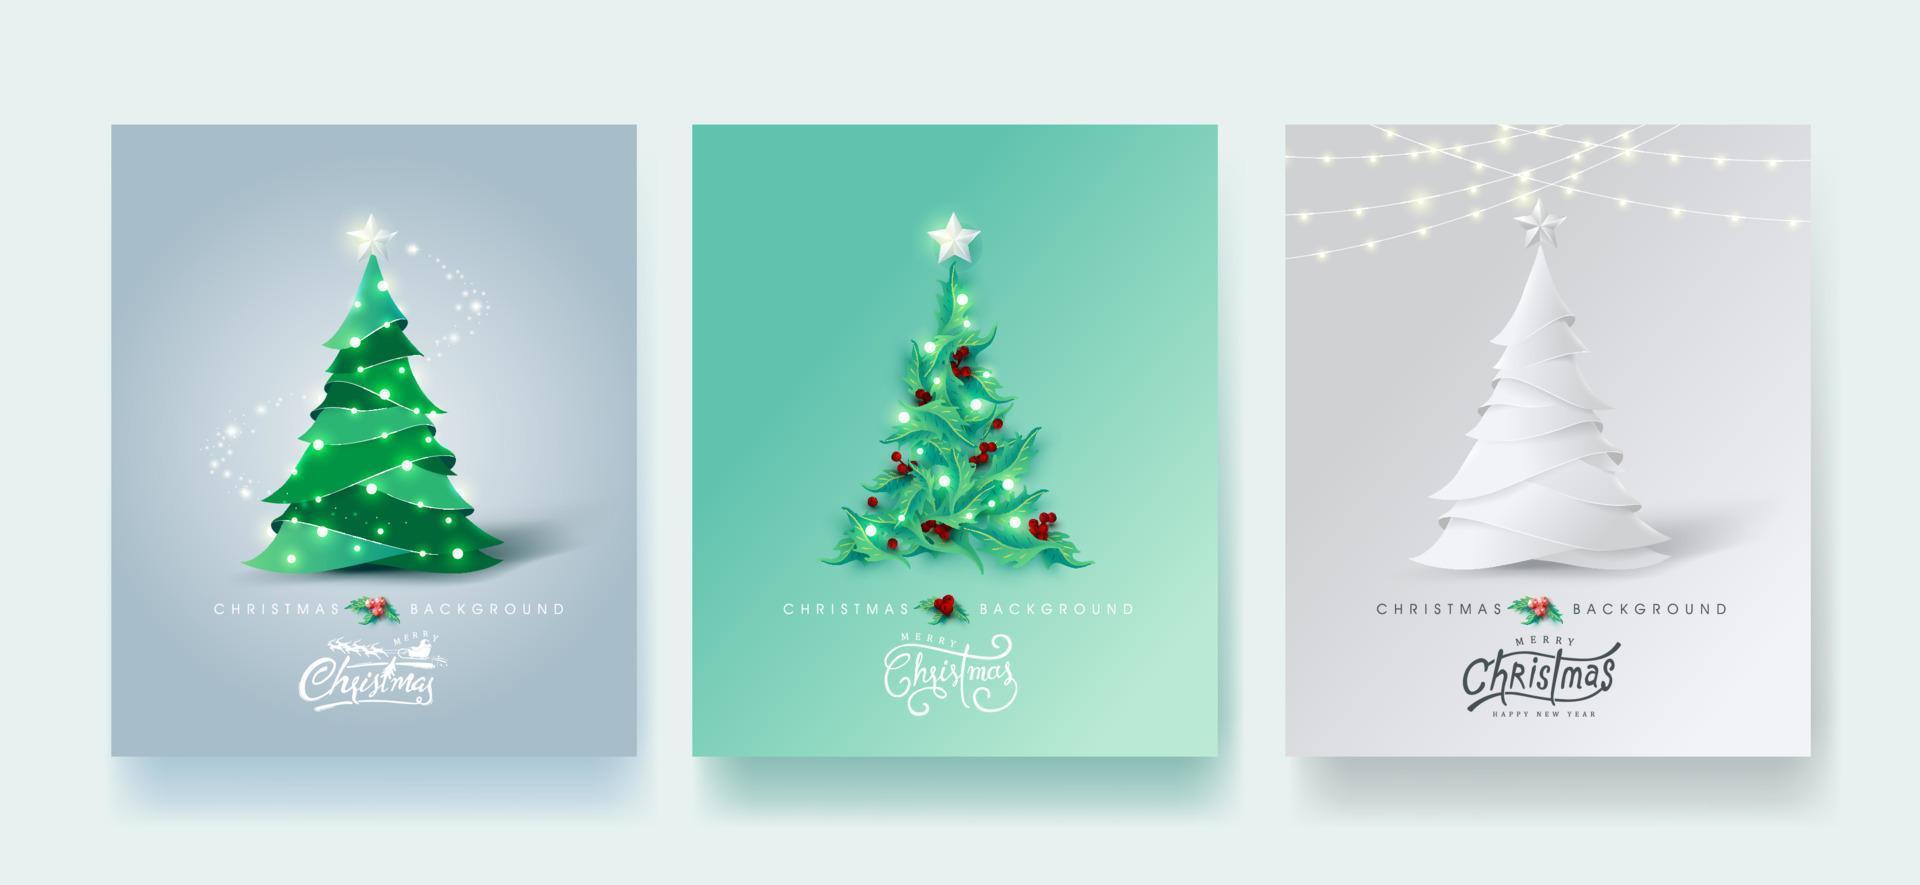 Happy New Year and Merry Christmas banner vector